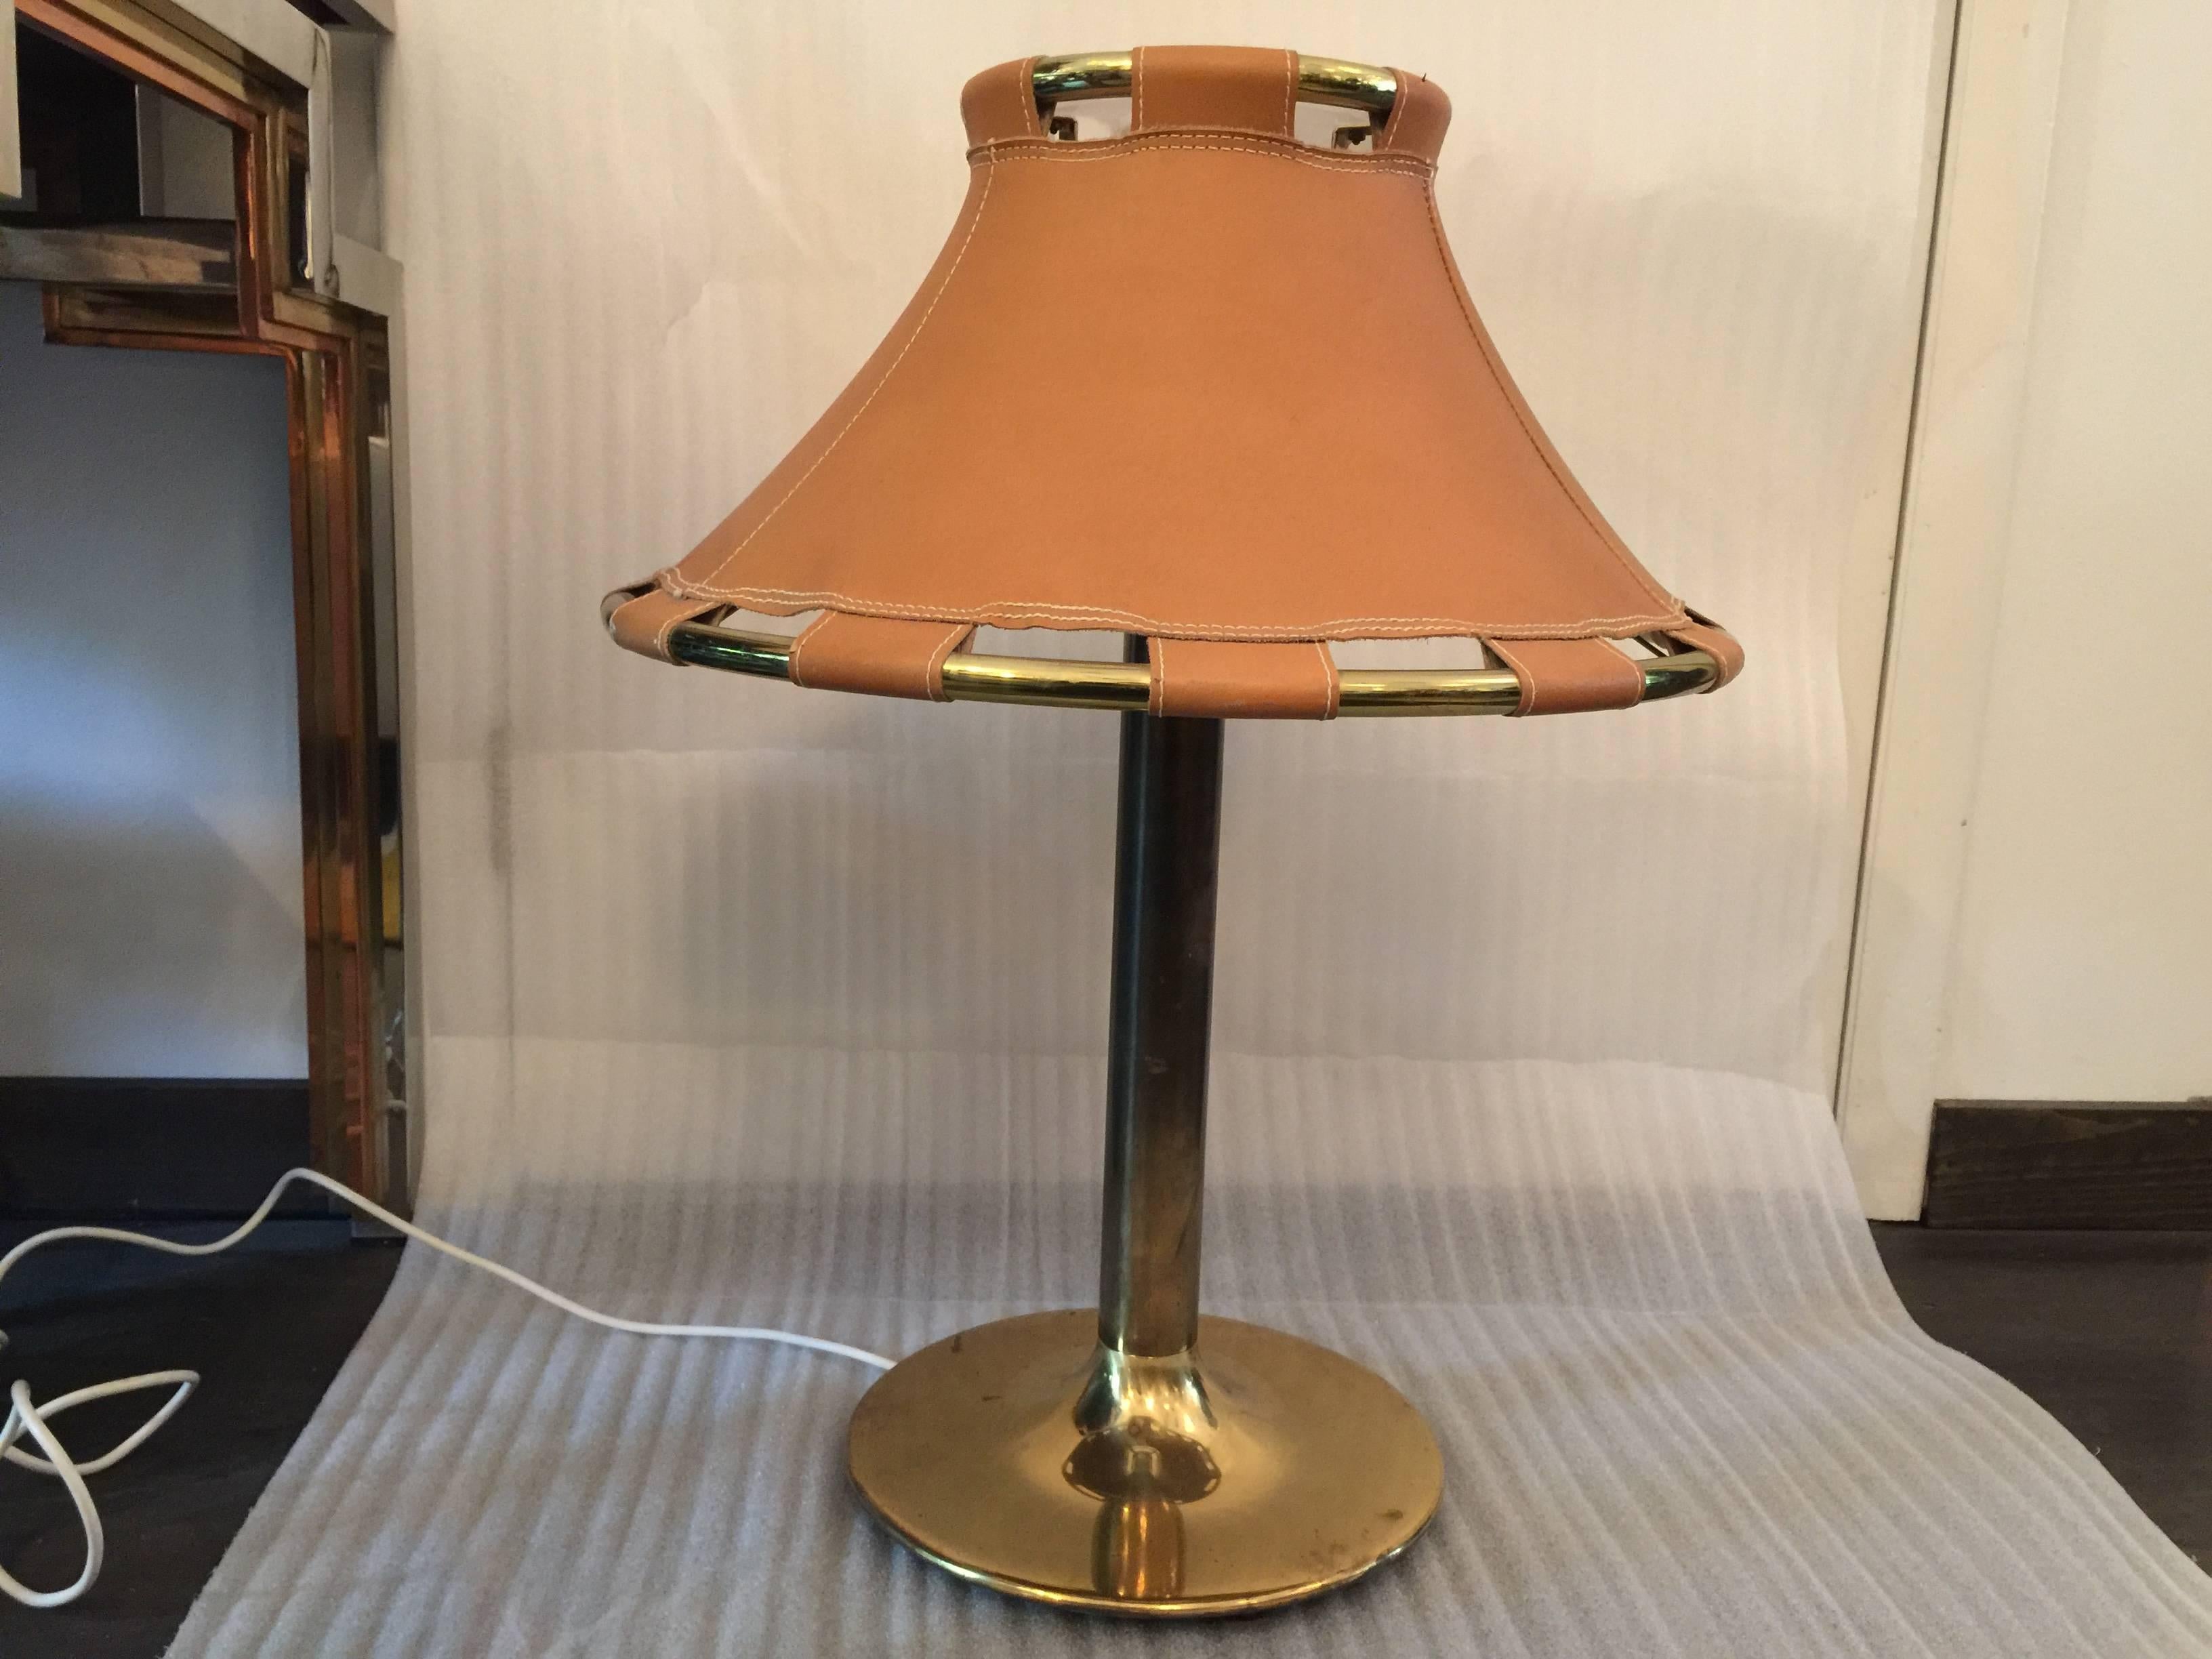 Mid-20th Century Brass and Leather Table Lamp by Ateljé Lyktan, Sweden, 1960s For Sale